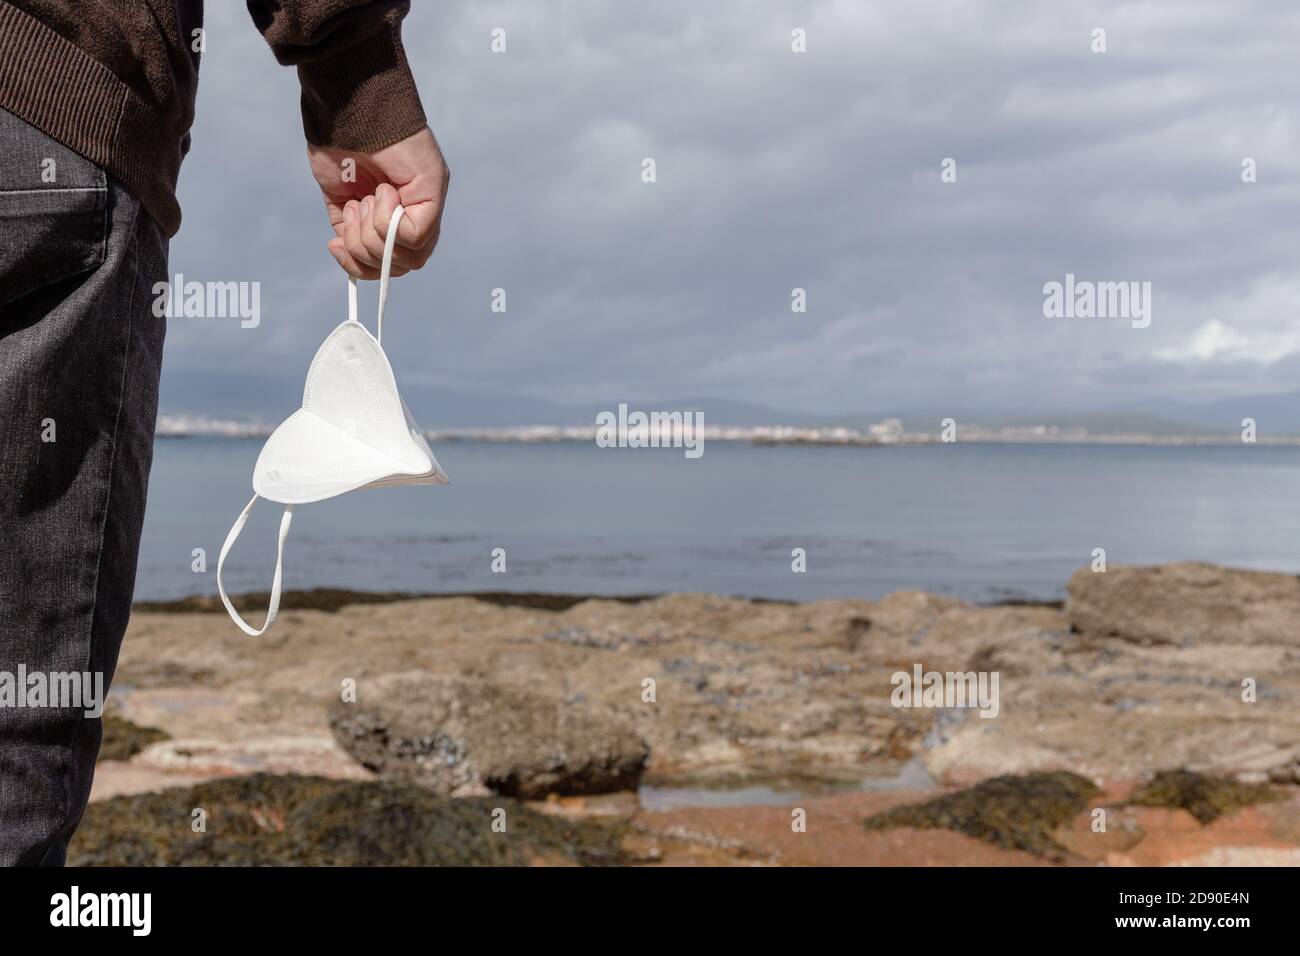 Male hand holding a face mask on a wild beach during a sunny day. Outdoor Freedom during Covid-19 pandemic concept. Copy space Stock Photo